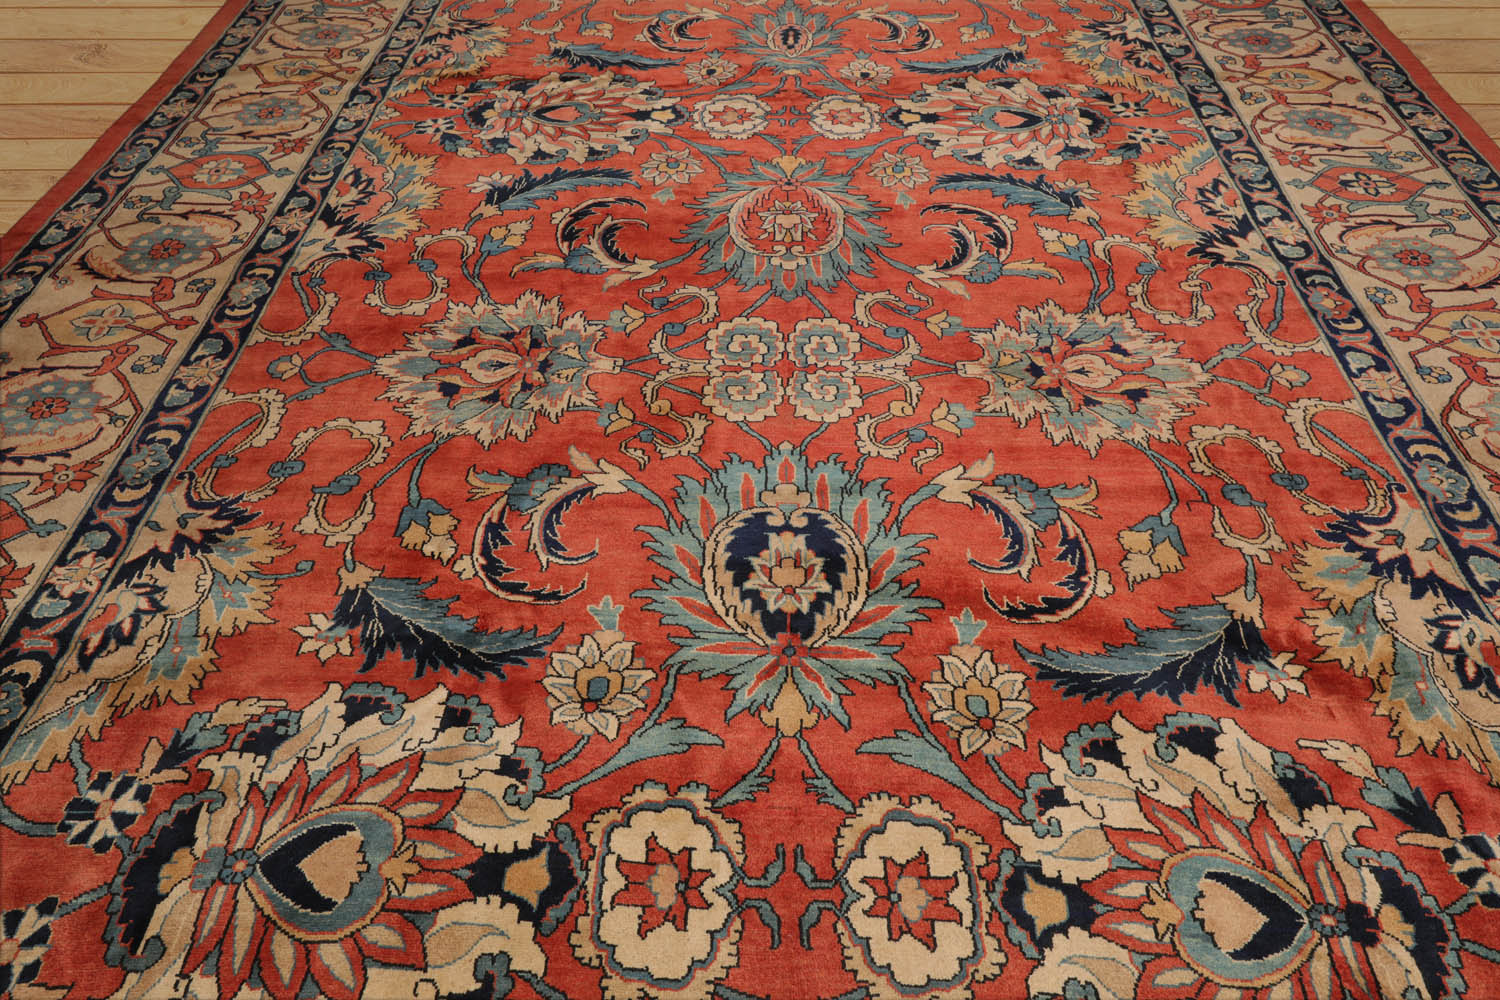 Diavione Palace Hand Knotted Persian 100% Wool Mahal Arts & Crafts Oriental Area Rug Salmon, Ivory Color